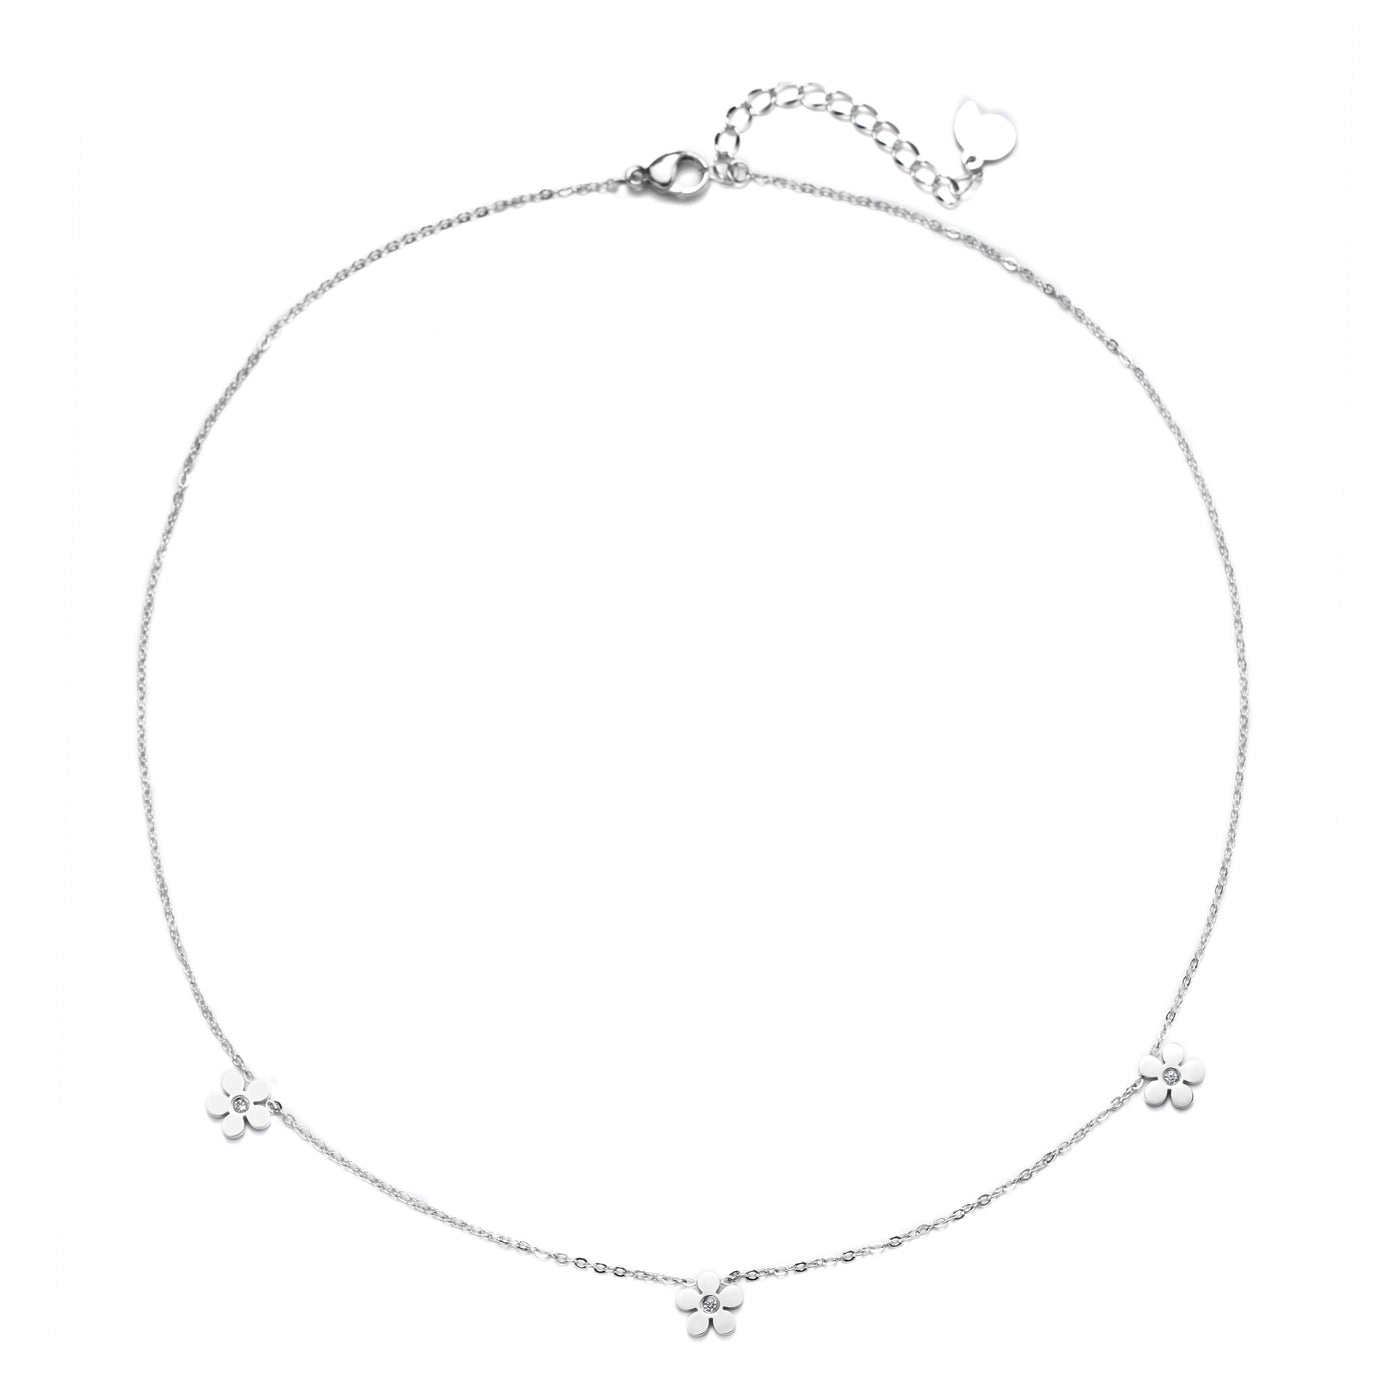 Forget-Me-Not Charm Necklace Silver